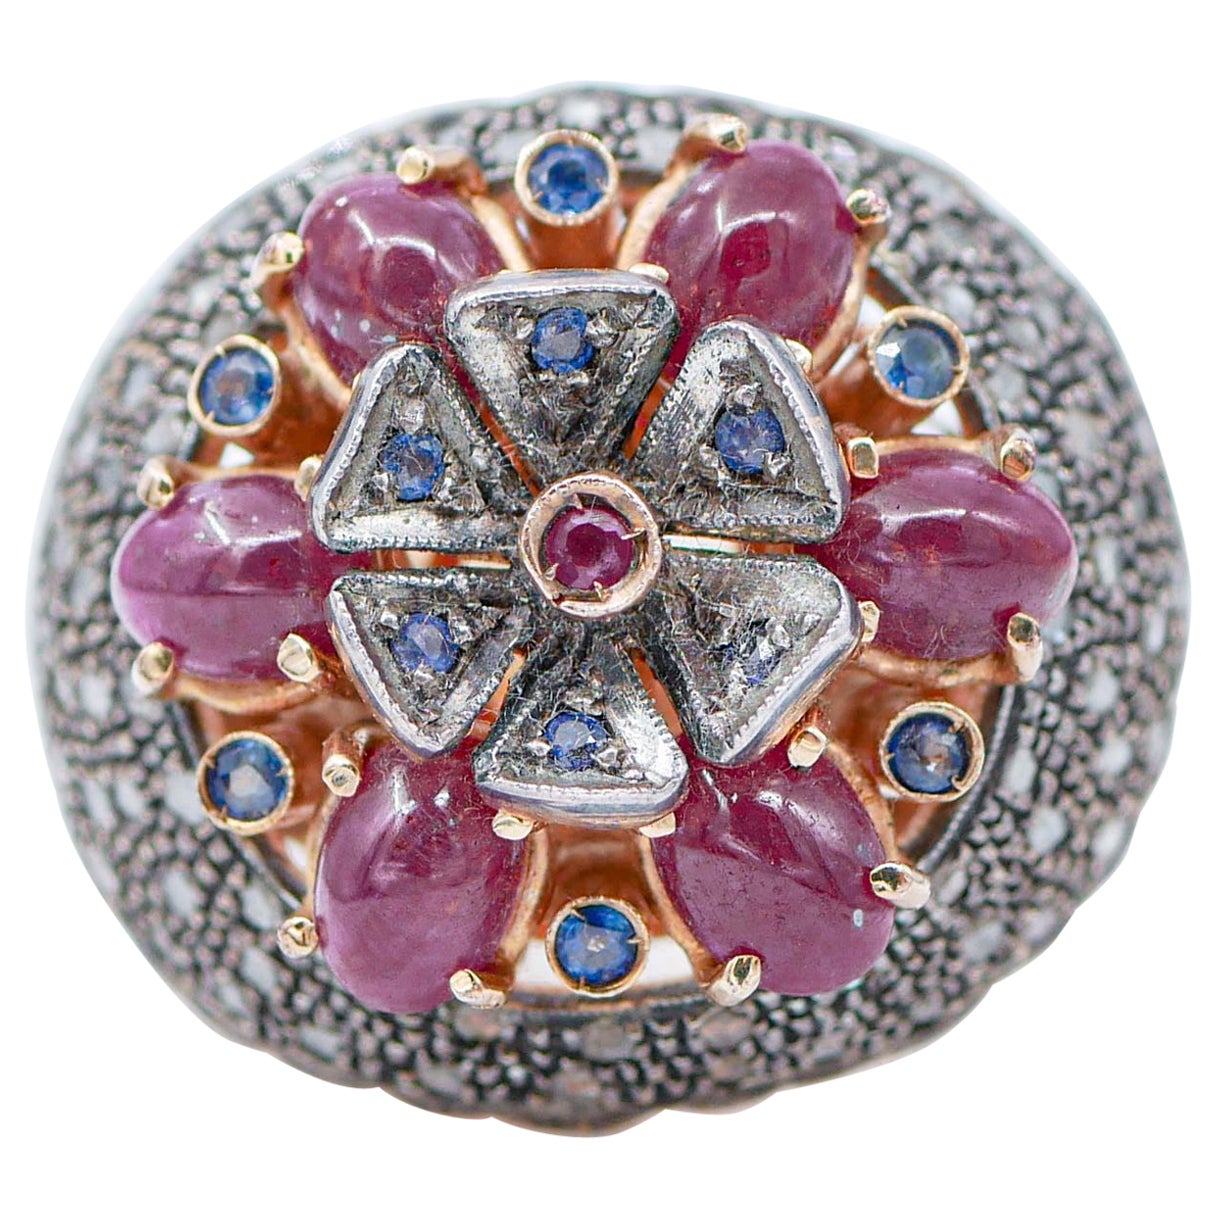 Rubies, Sapphires, Diamonds, 14 Karat Rose Gold and Silver Ring. For Sale